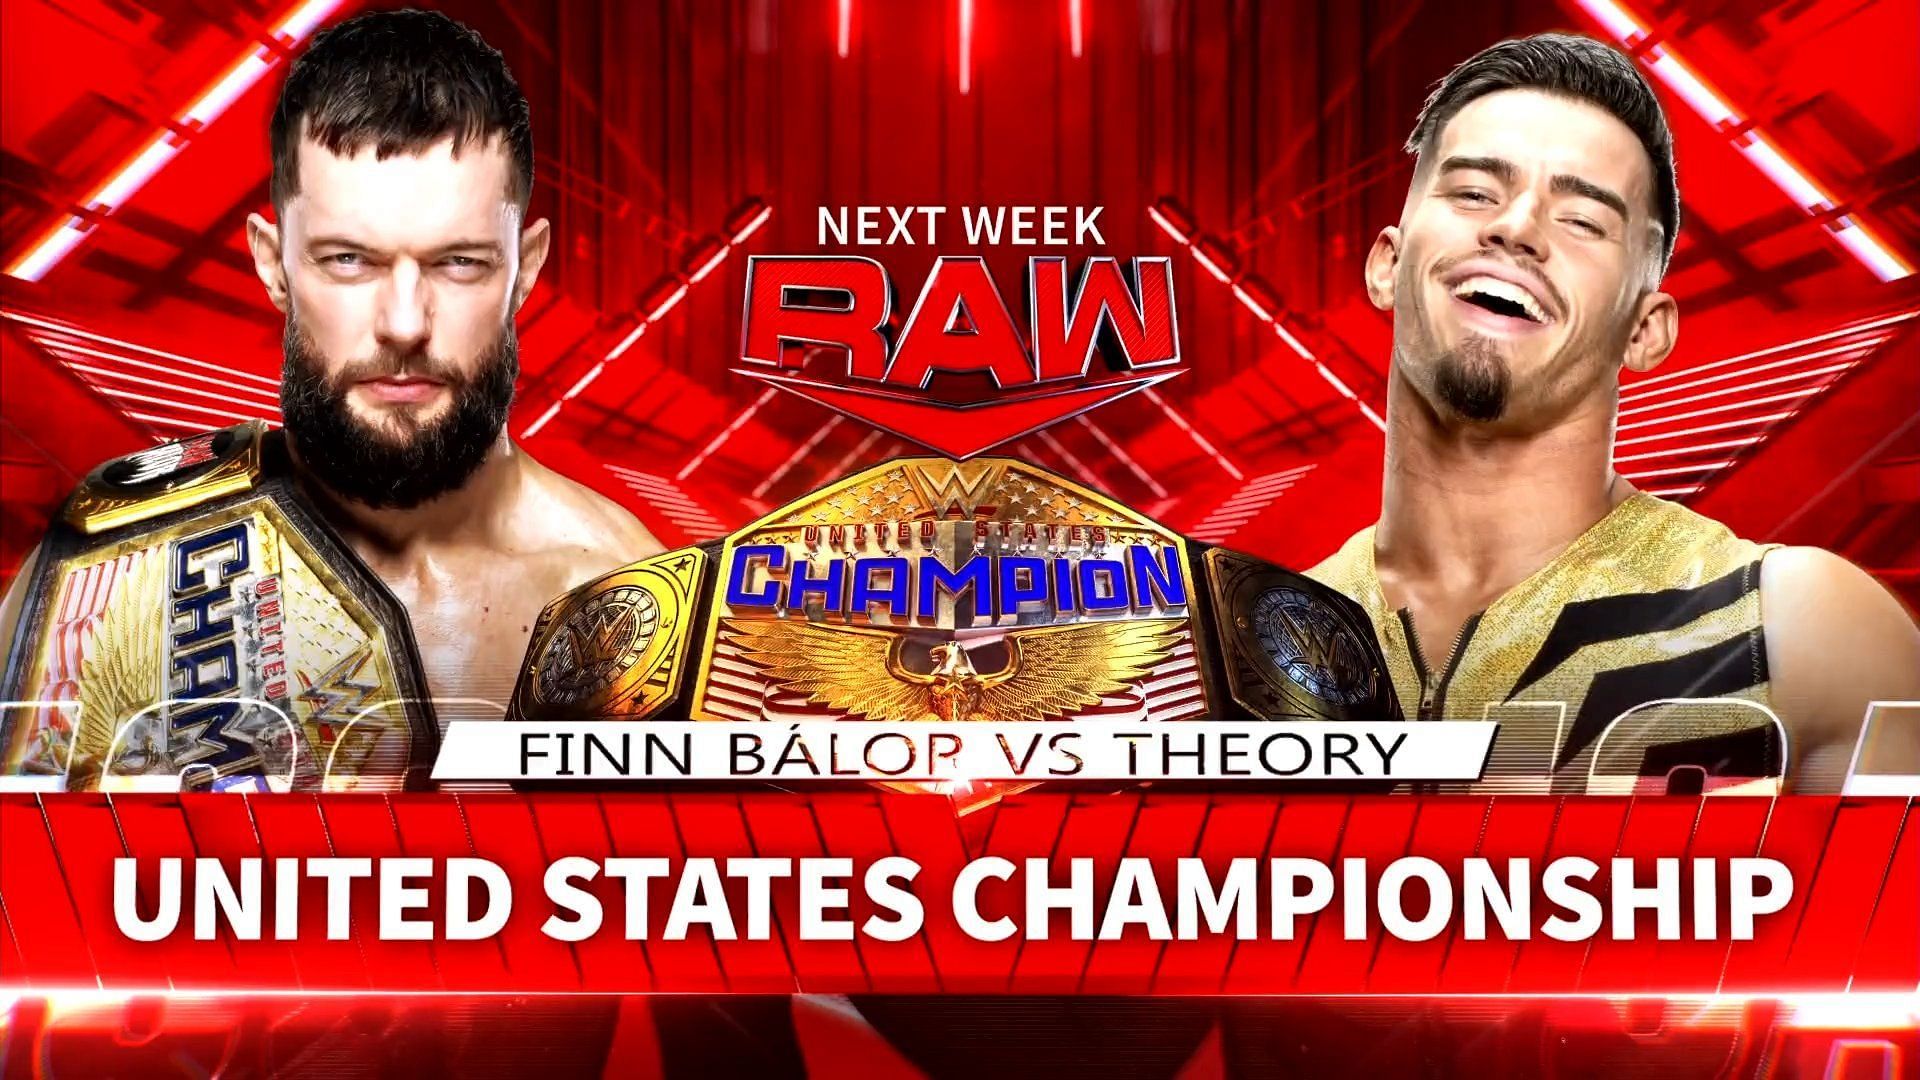 Finn B&aacute;lor will defend the Intercontinental Championship against Theory